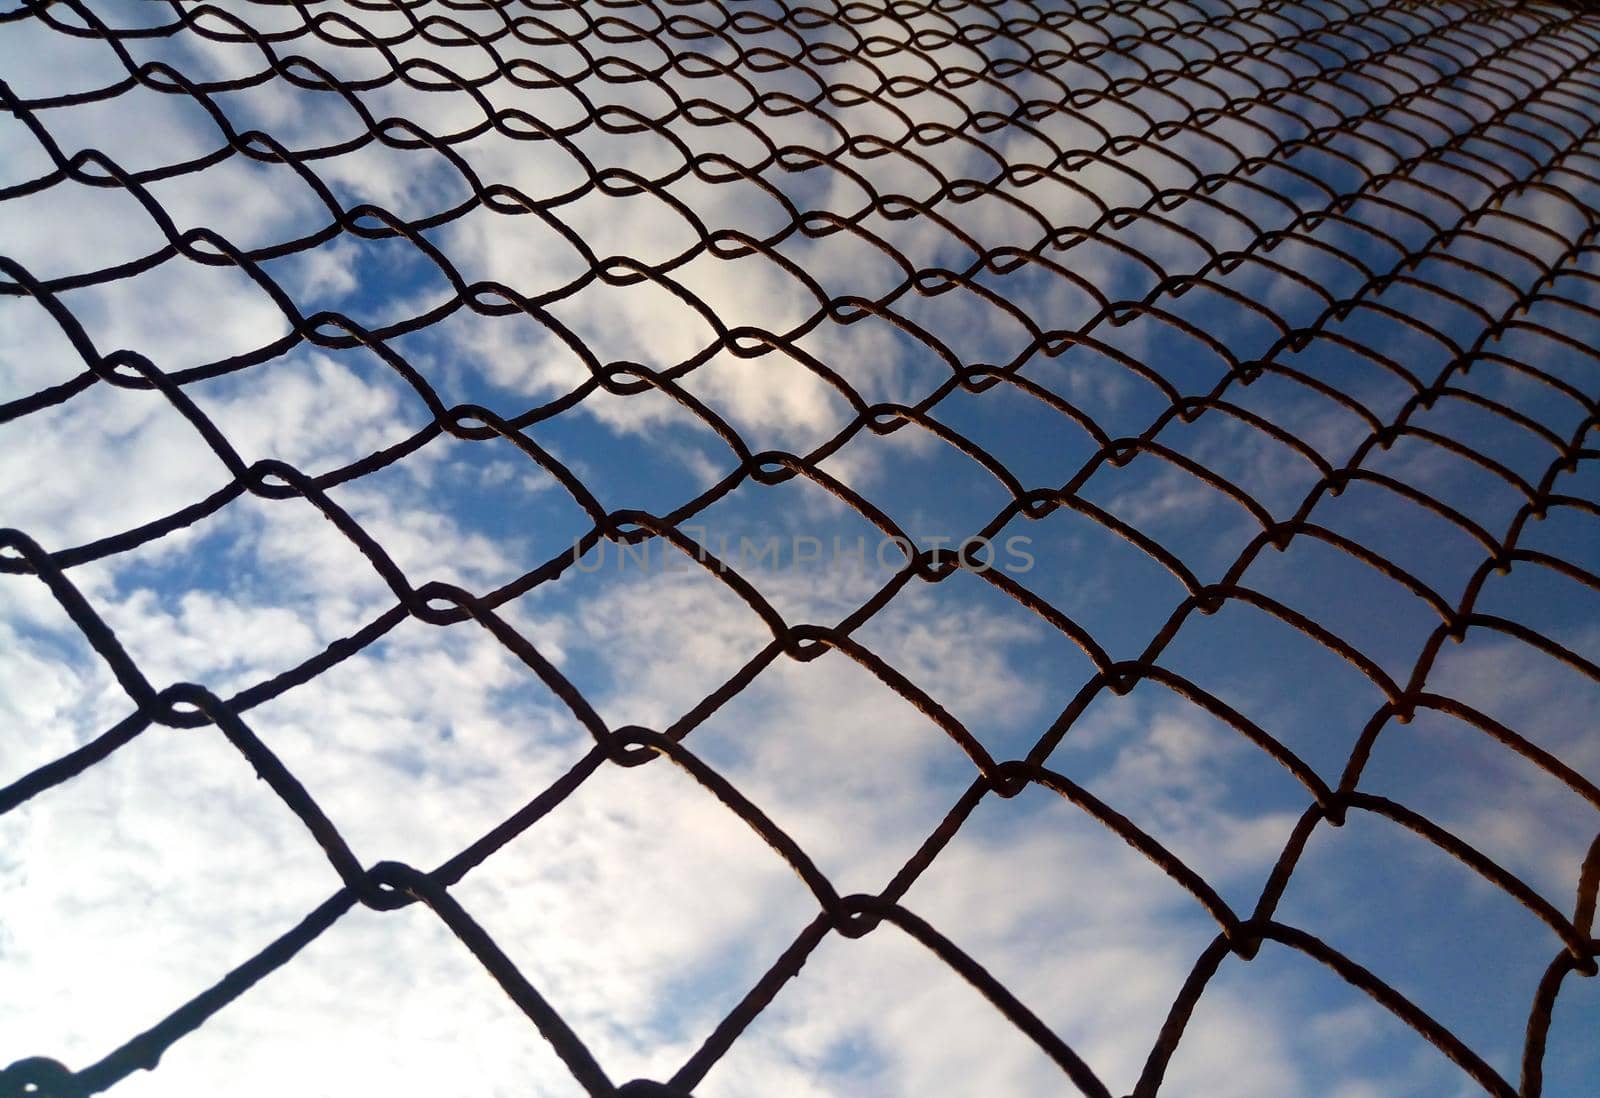 Bright blue sky with white clouds through a metal grid chain fence. Mesh background by lapushka62